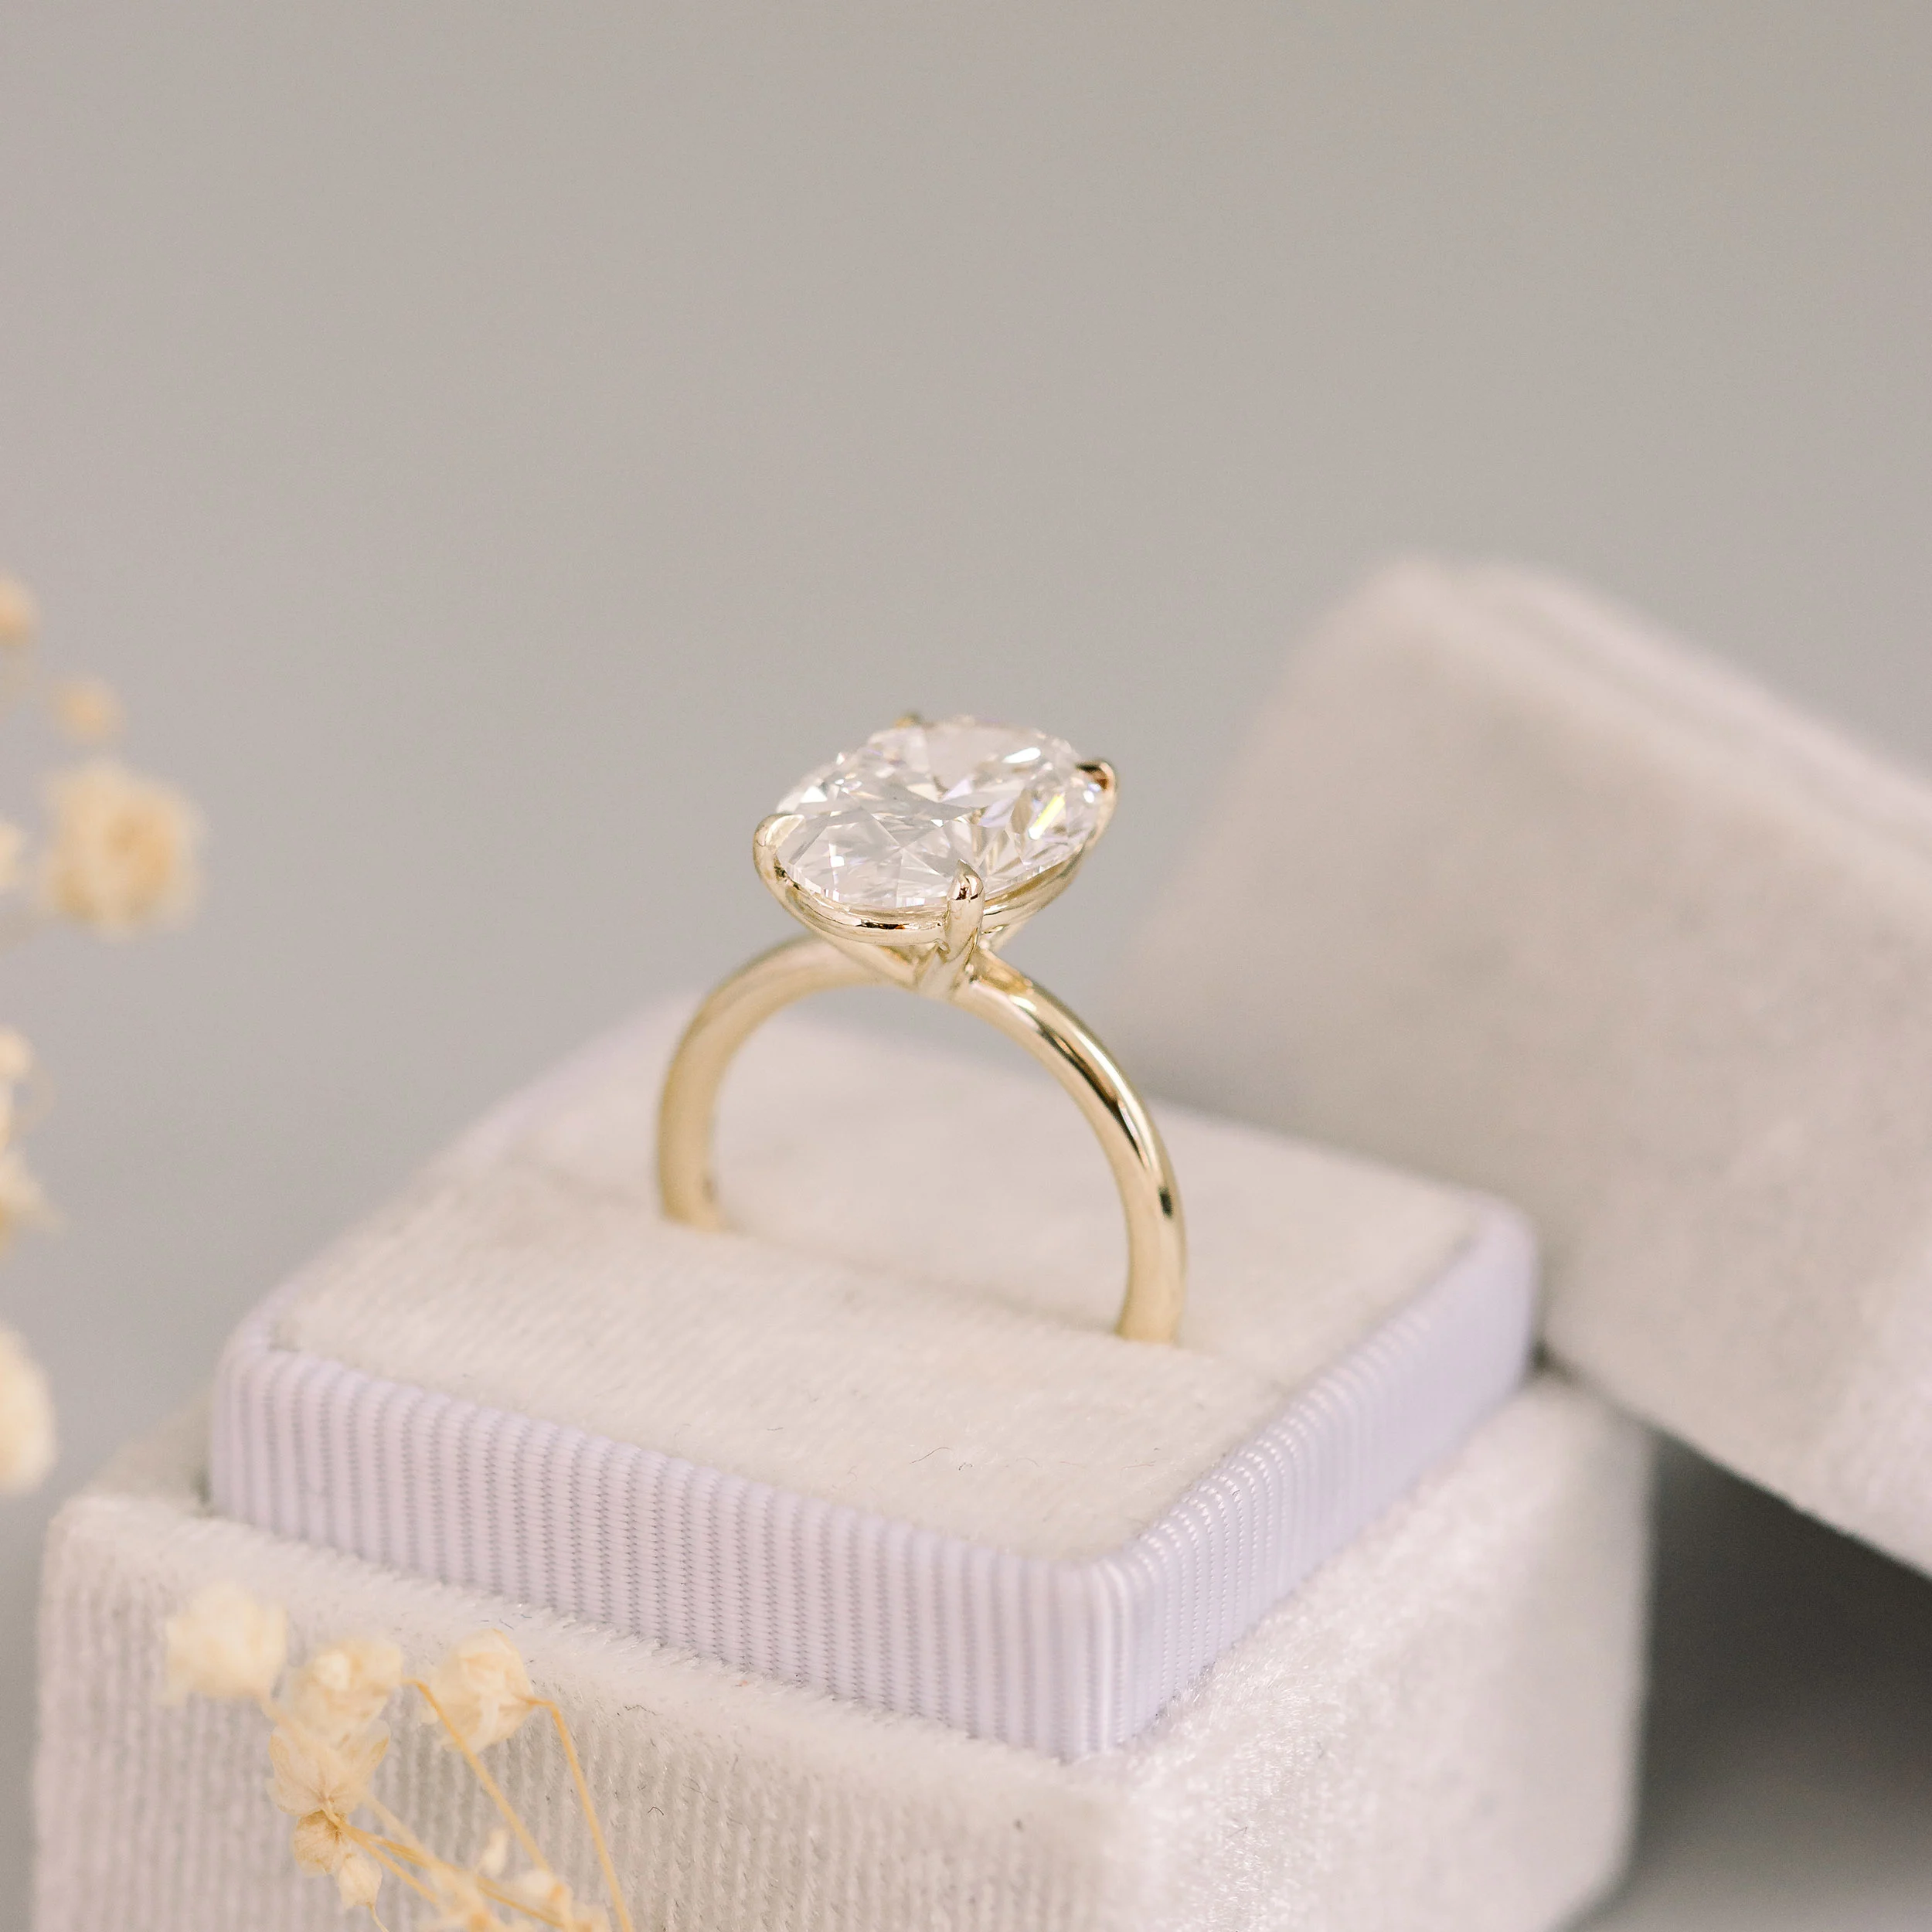 4.75 Carat Synthetic Diamonds set in Yellow Gold Oval Petite Four Prong Solitaire (Profile View)